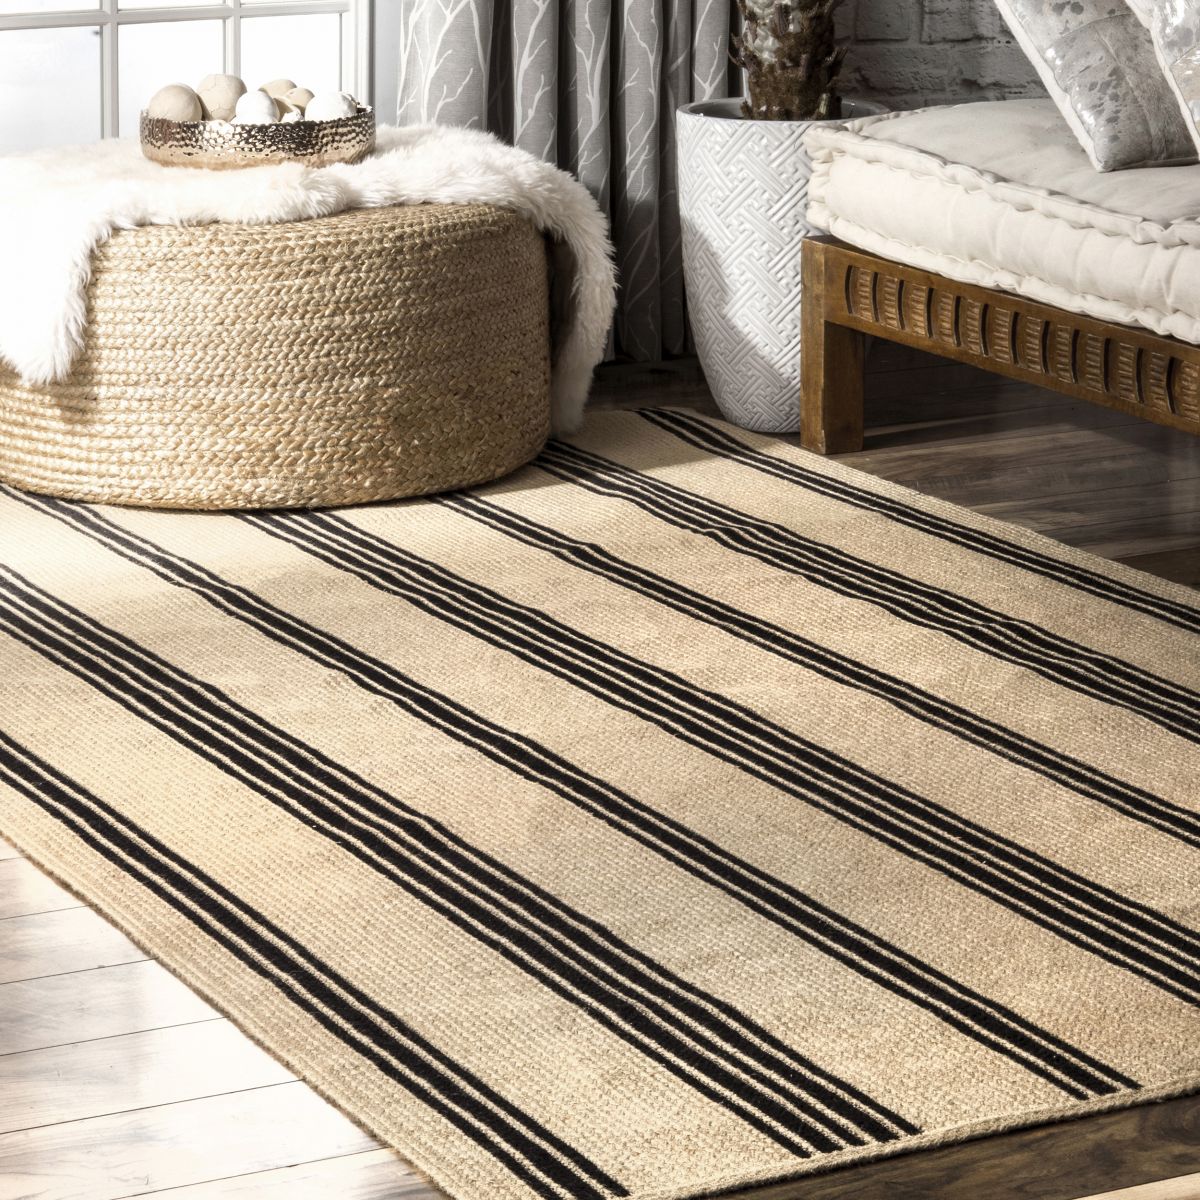 Natural Braided Striped Jute Area Rug | Rugs USA